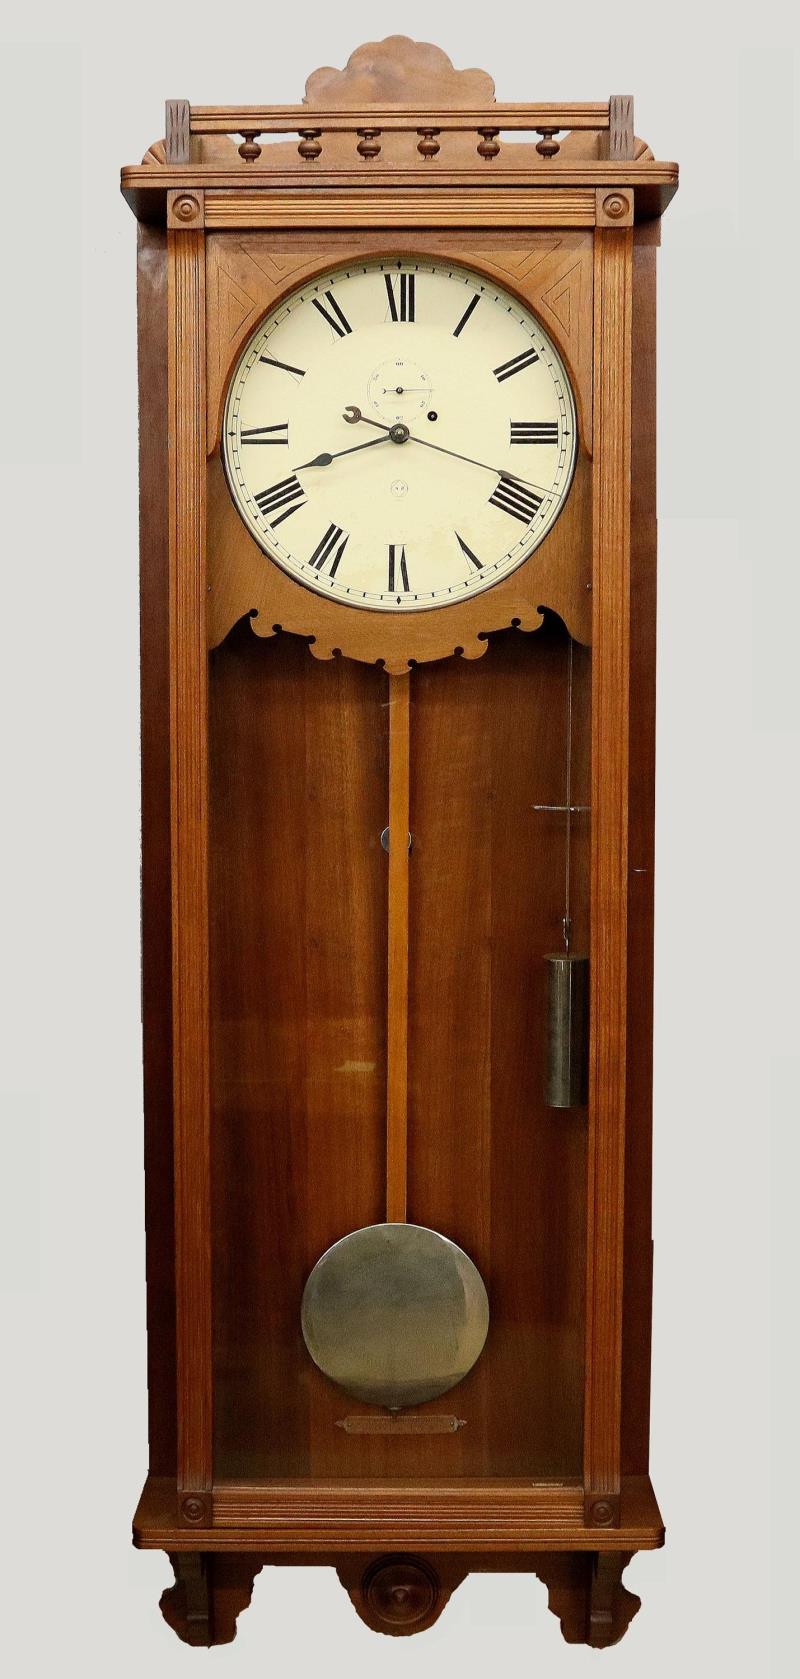 Cleveland Electrical Mfg. Co. Master Time Clock